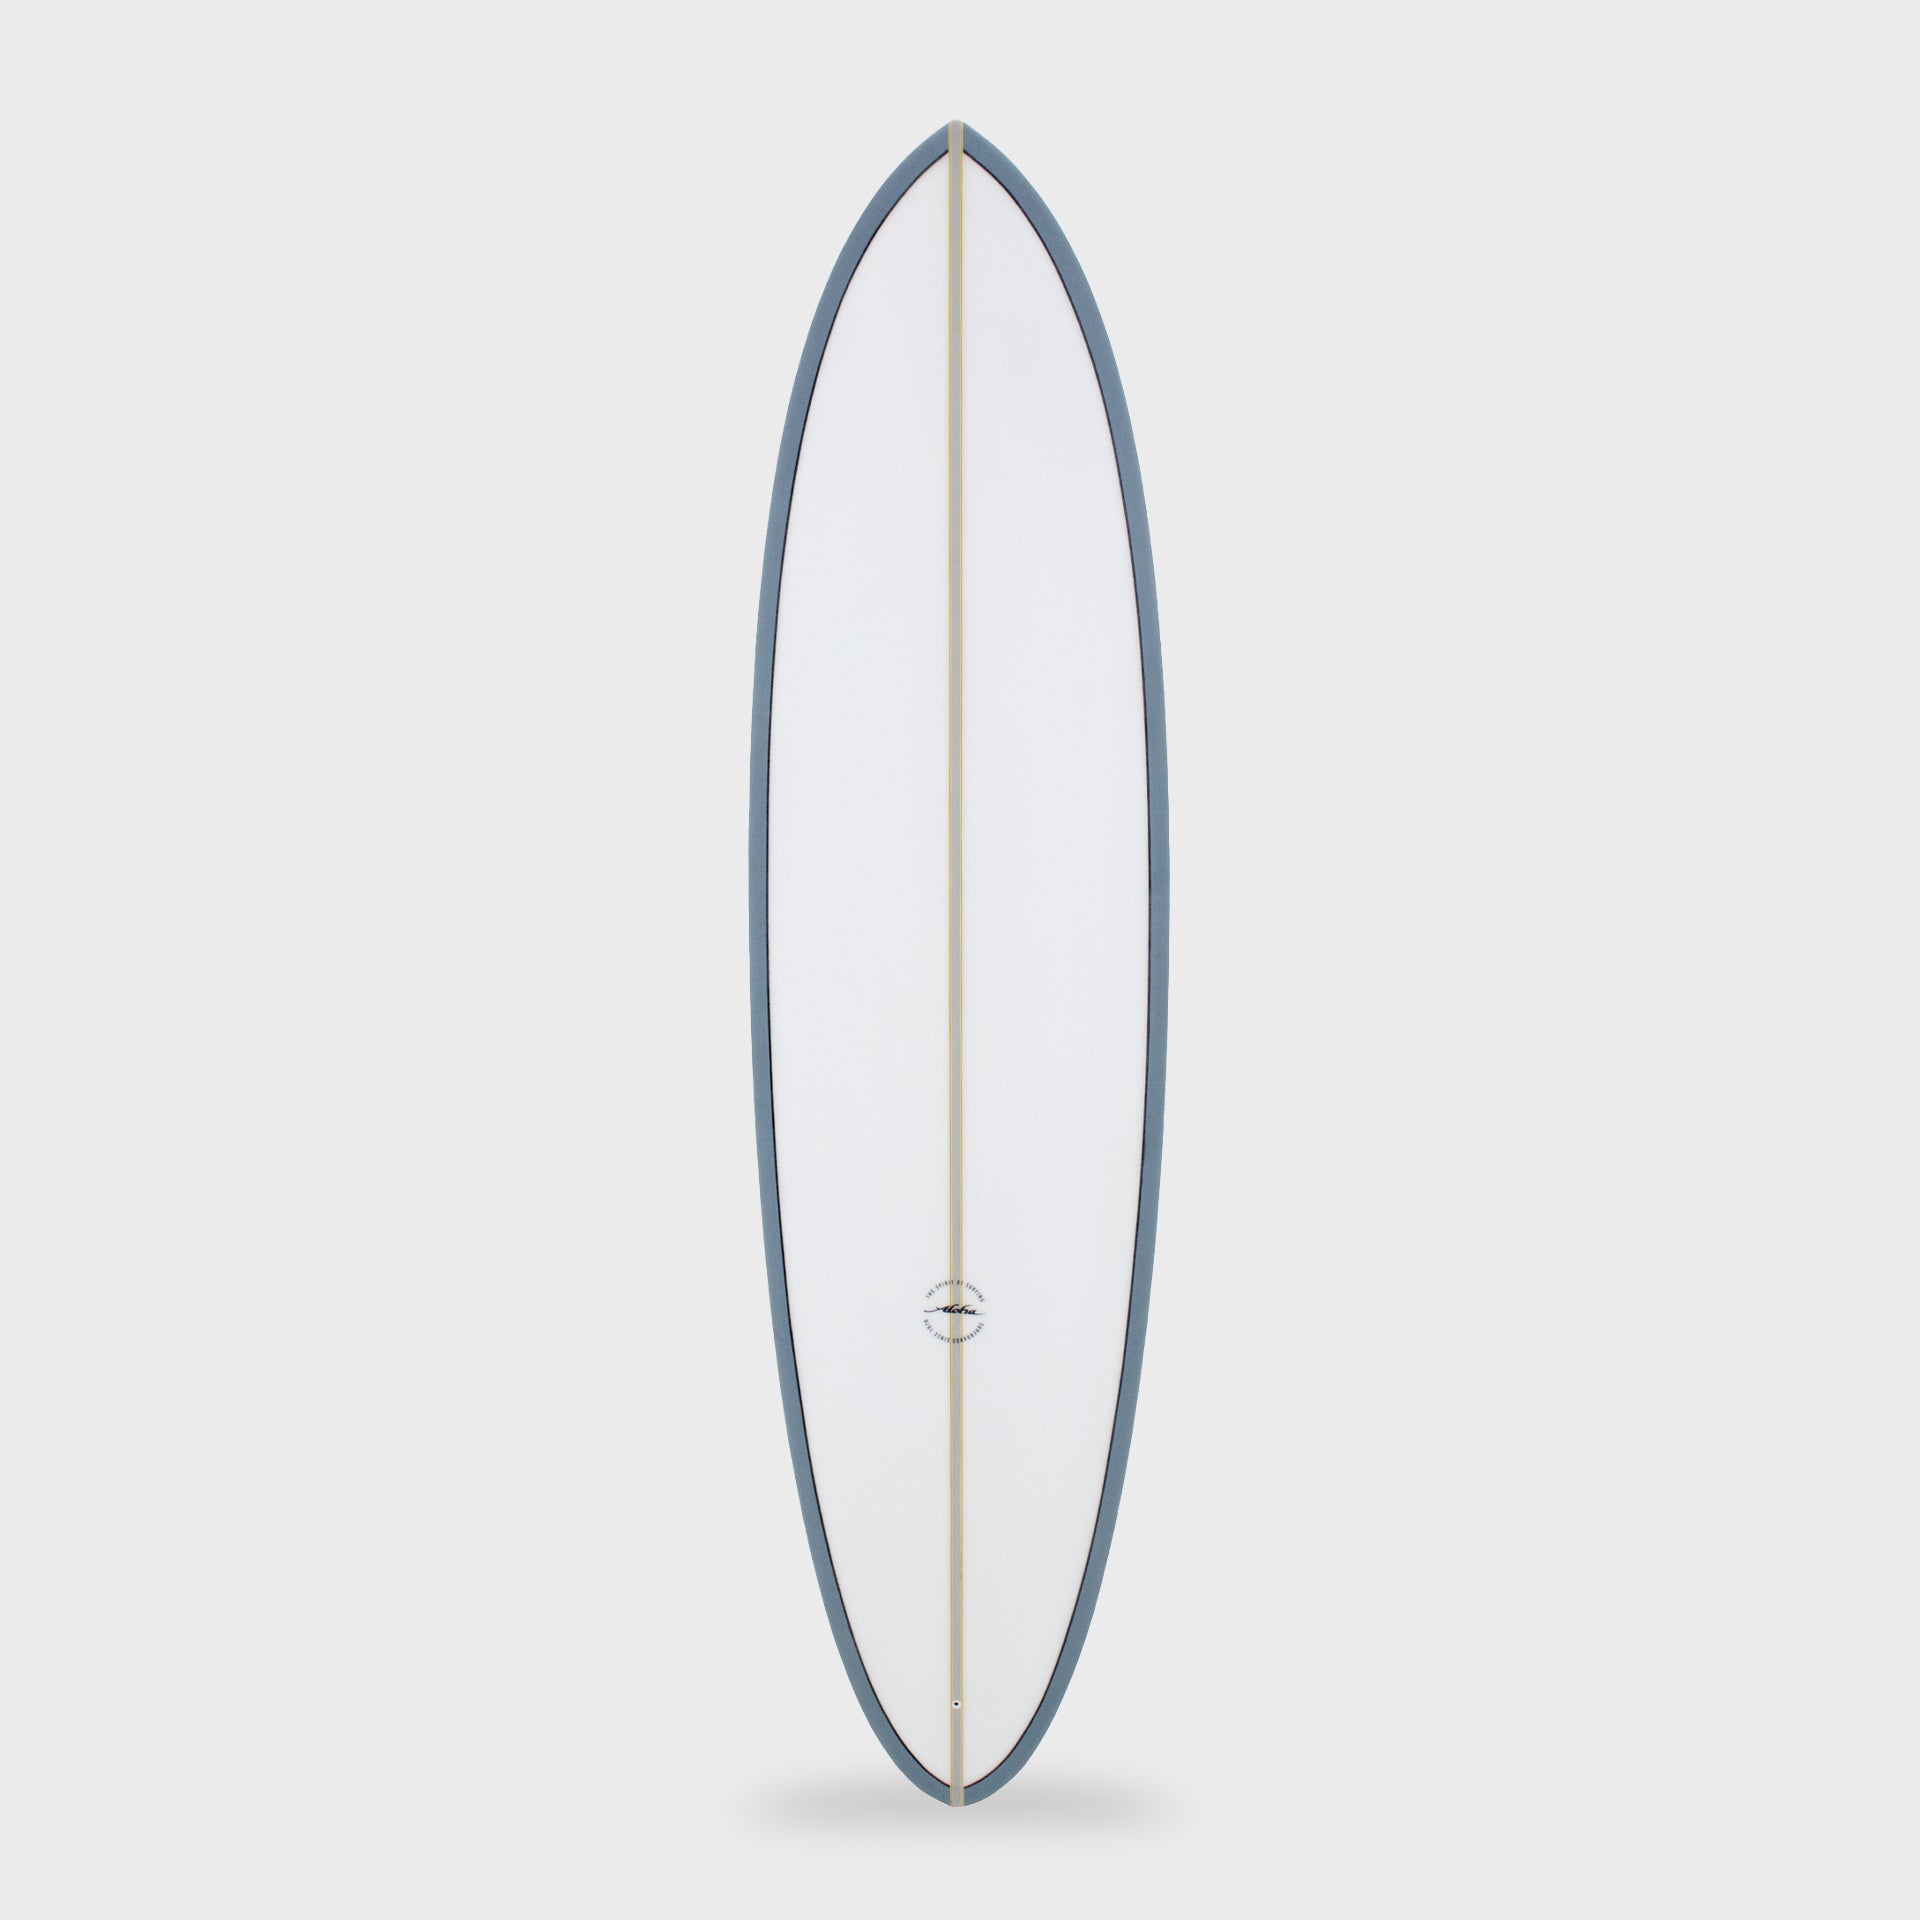 EZ - MID PU - PVCP - Surfboard - 7&#39;2, 7&#39;4 and 7&#39;8 - Steel Blue - ManGo Surfing